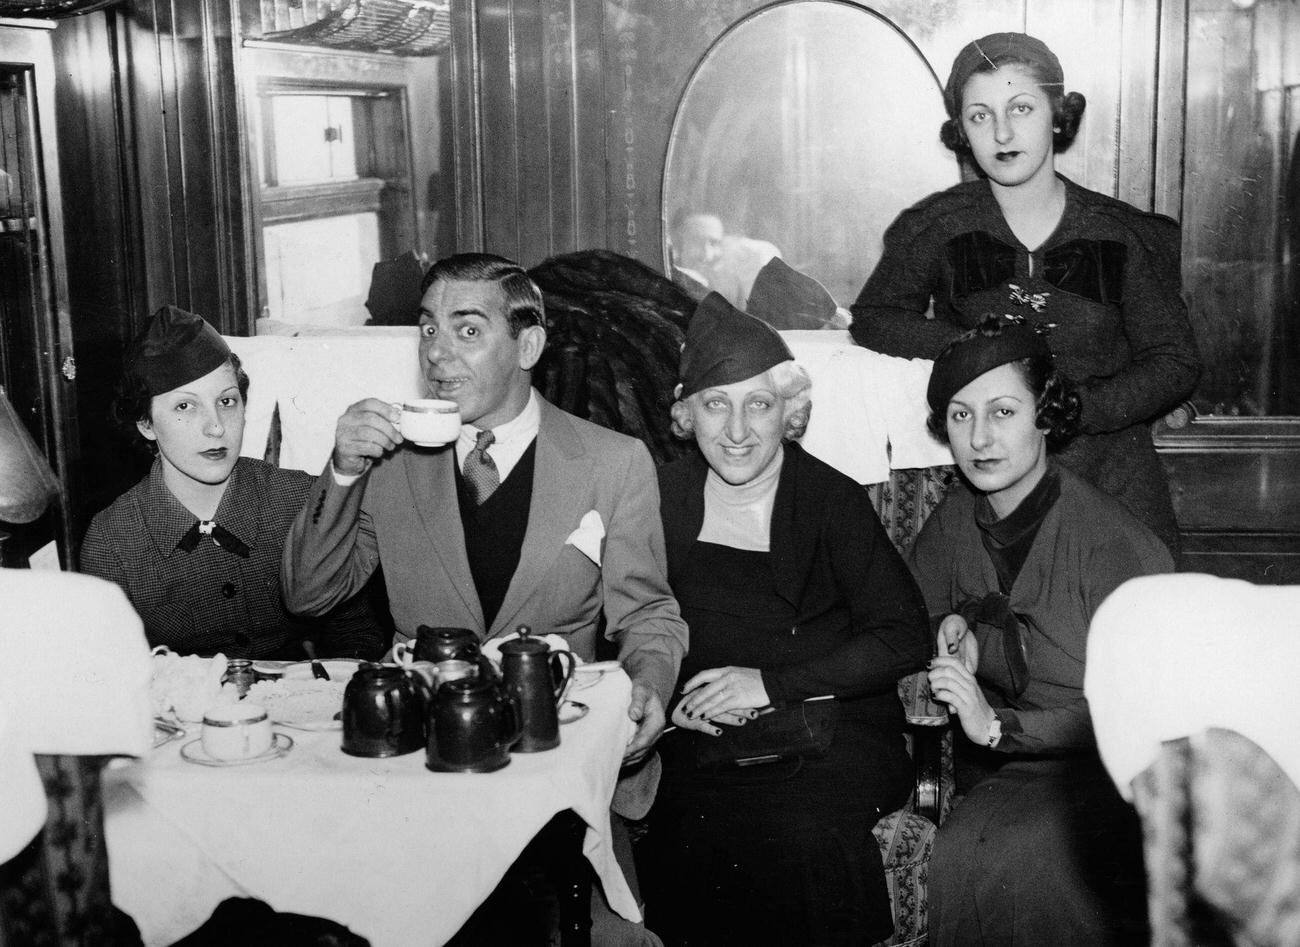 Author Eddie Cantor in the train compartment with his wife and three of his daughters, 1930